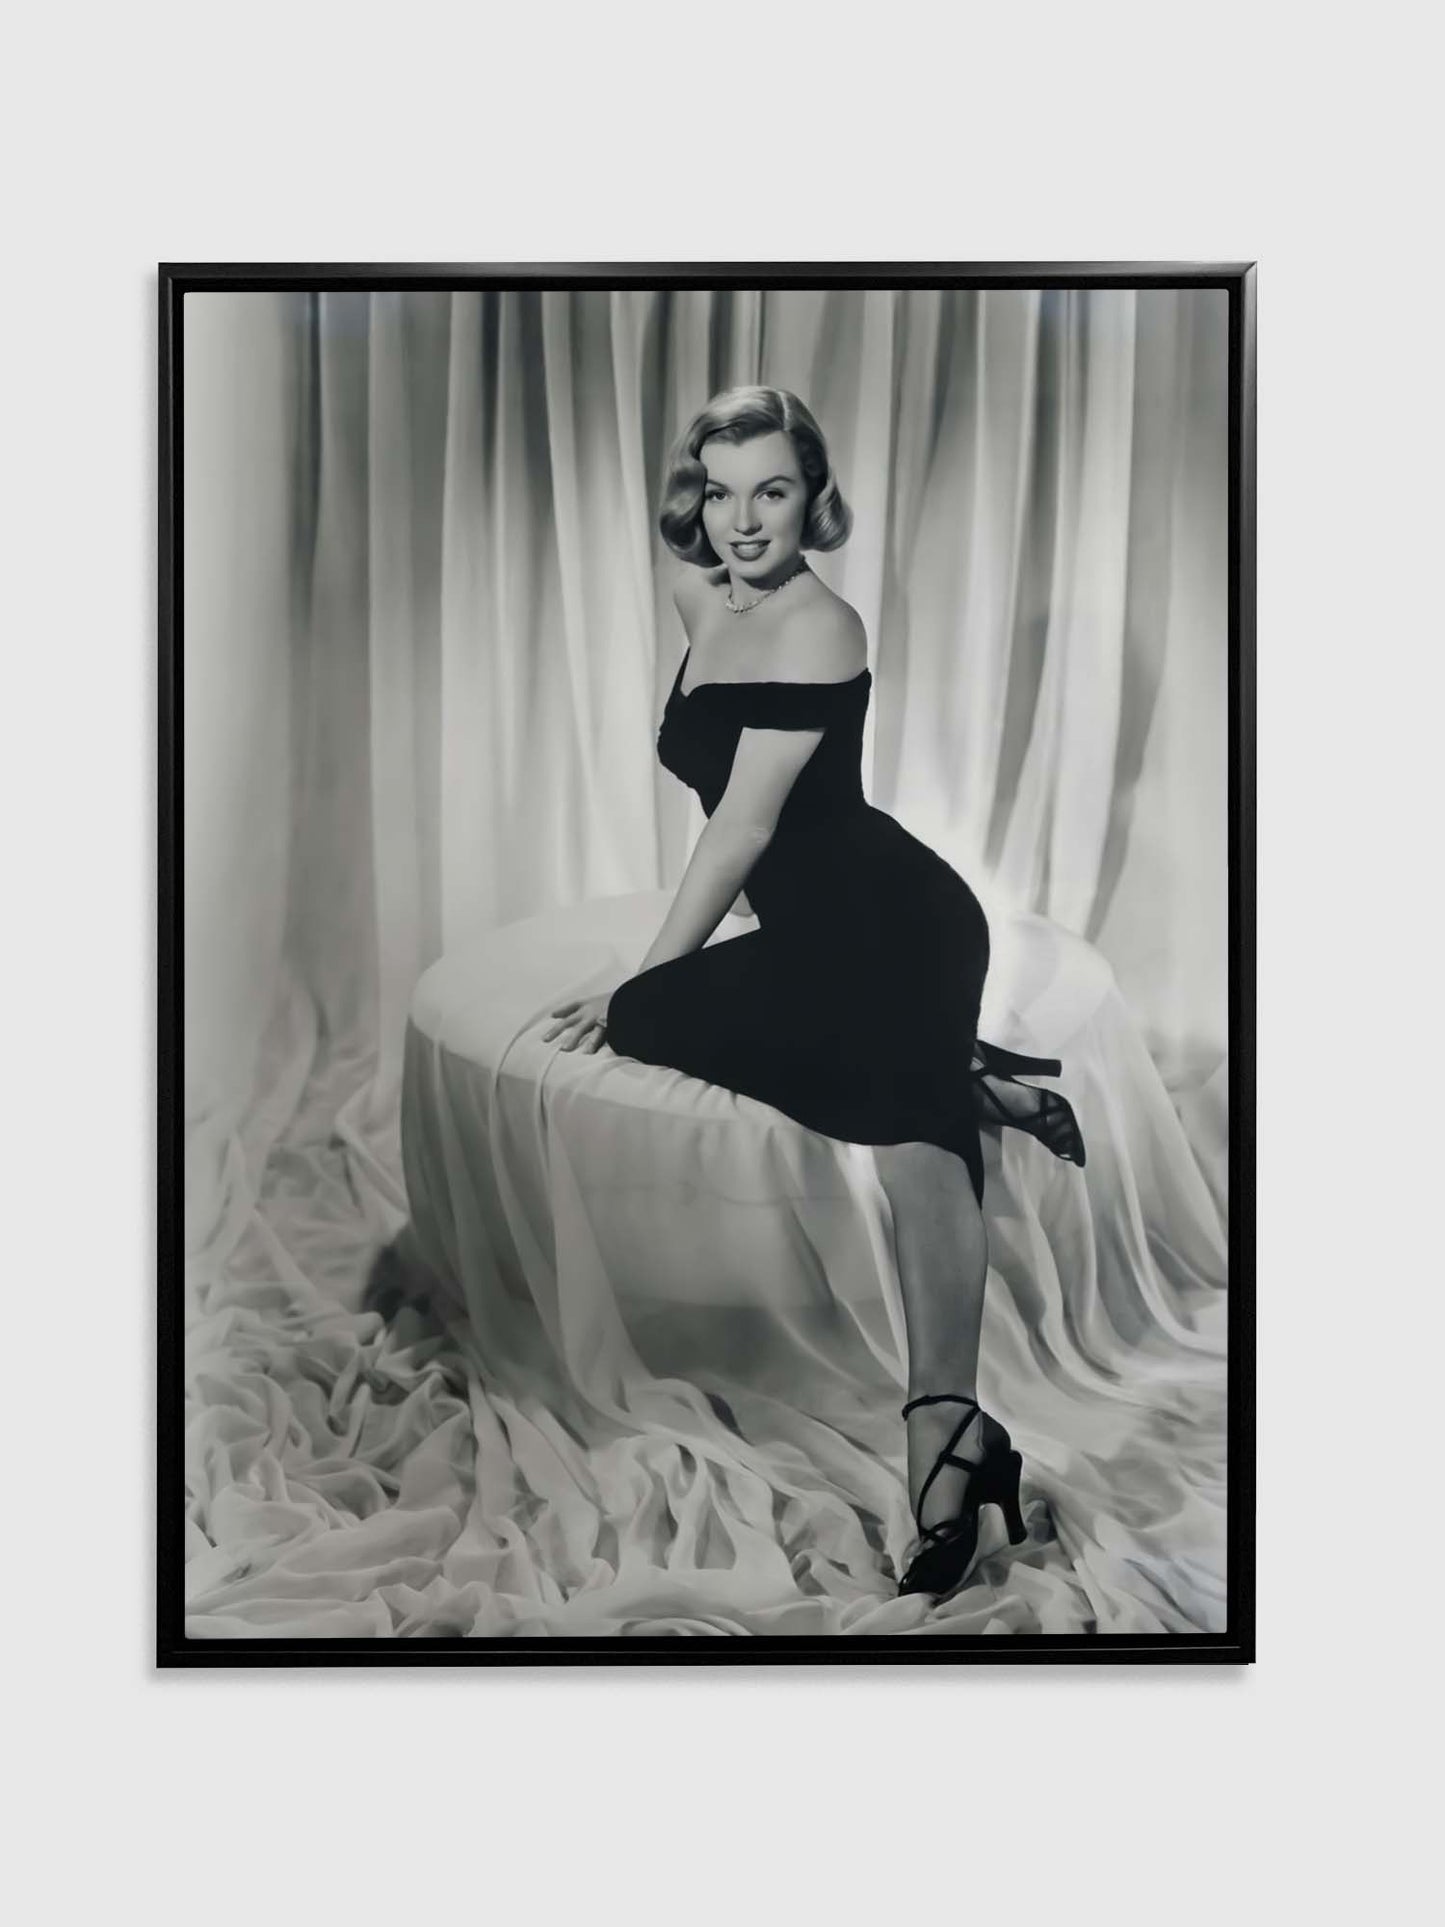 Wall Art-Marilyn in the room- Canvas Print